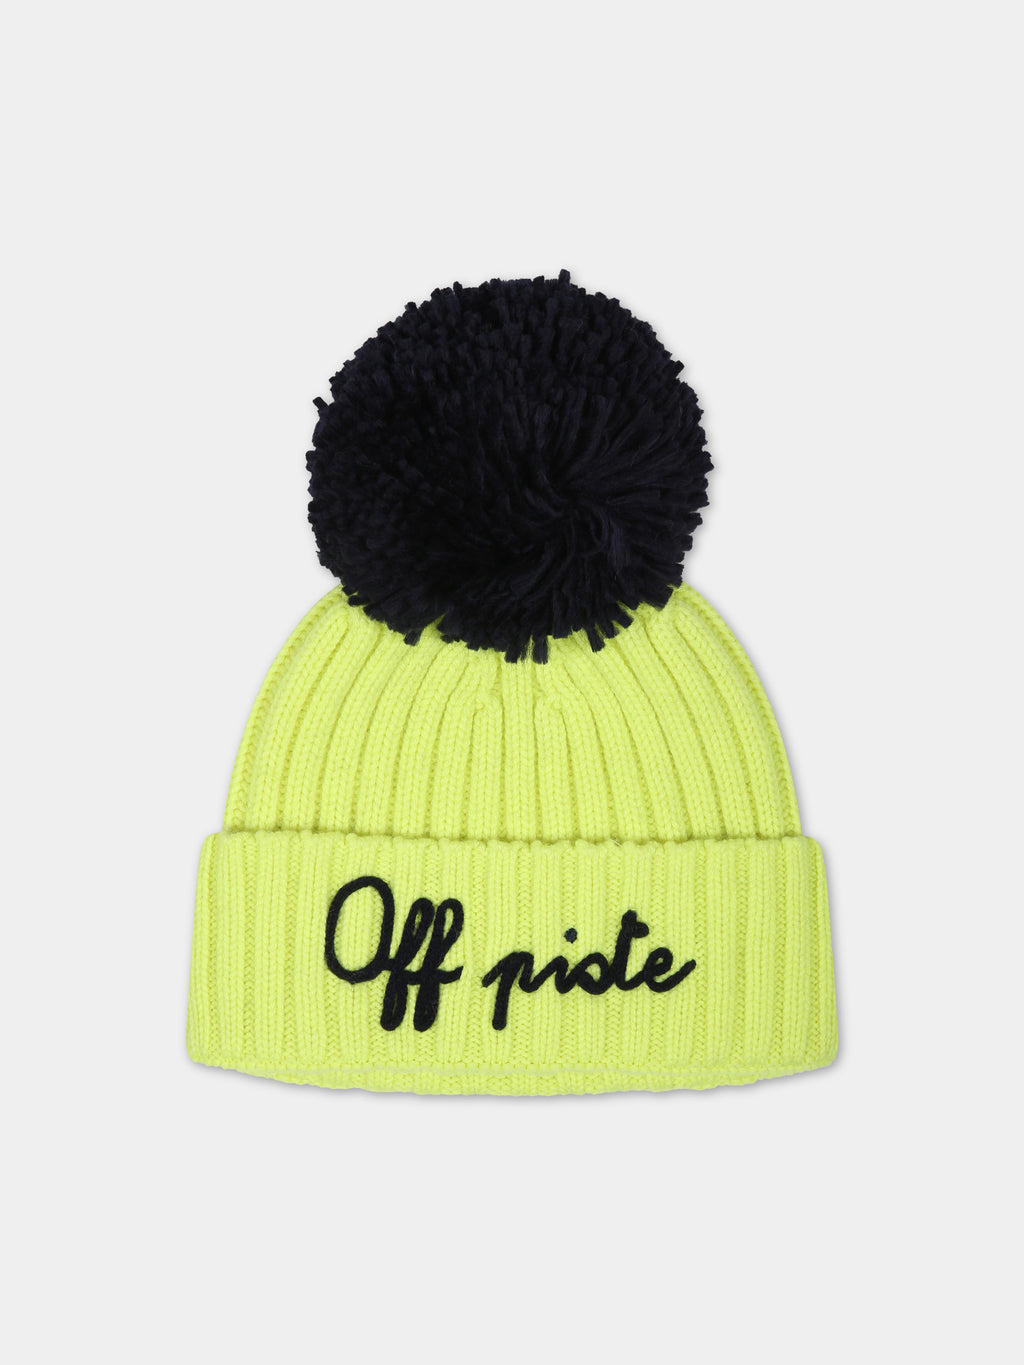 Yellow hat for kids with pompon